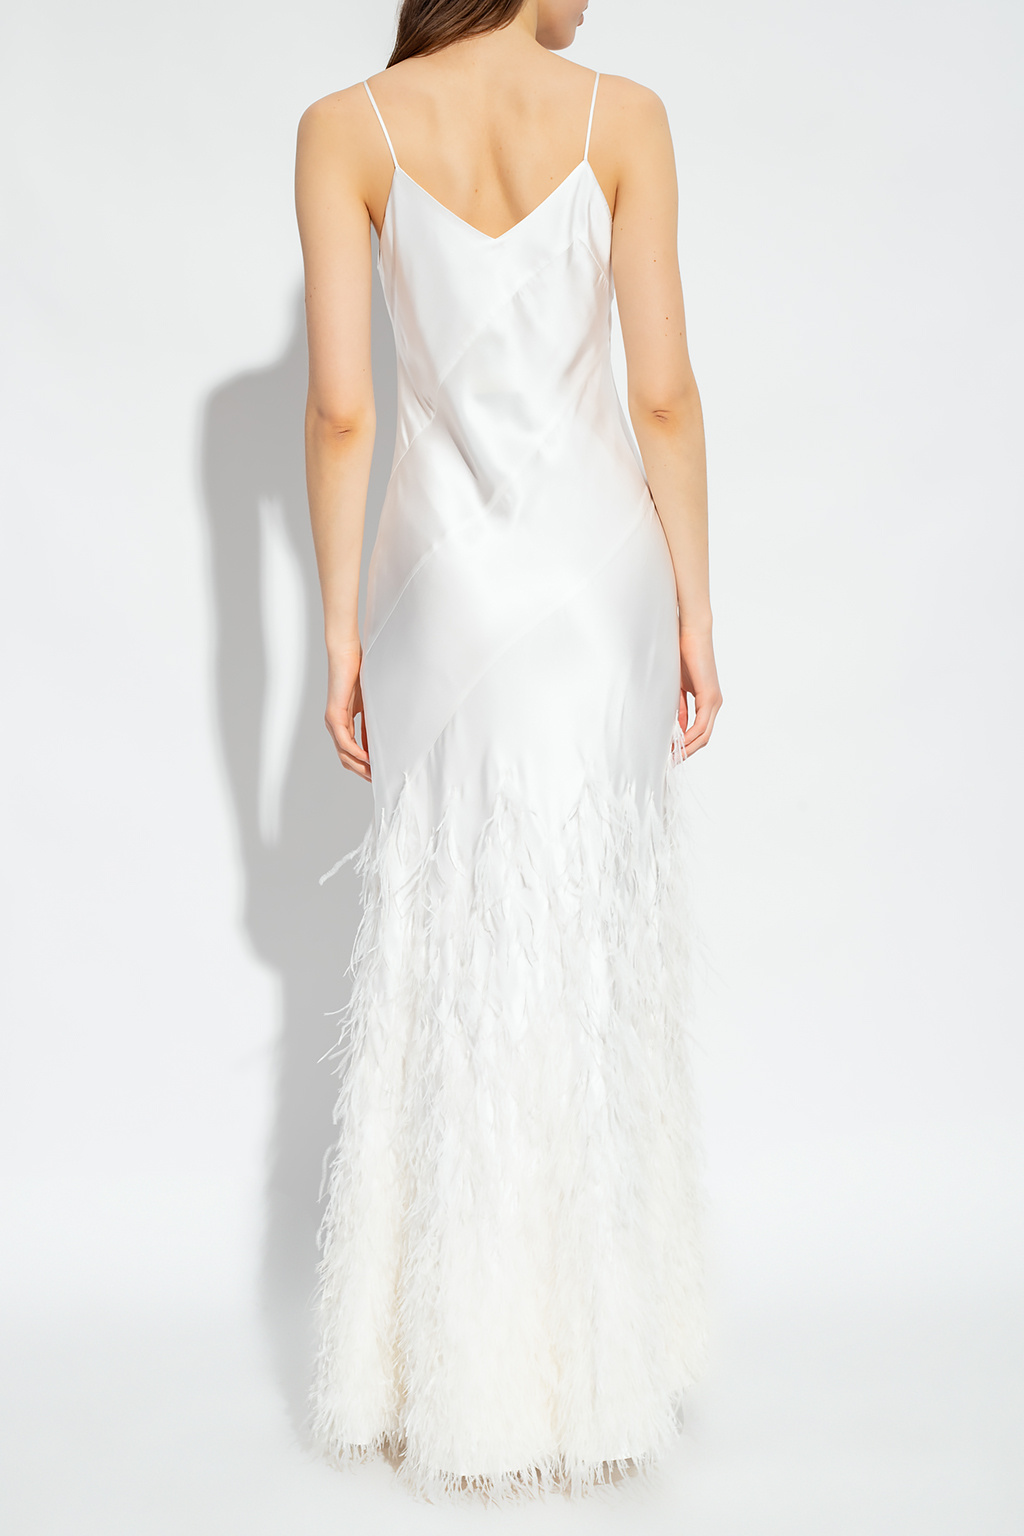 Cult Gaia ‘Hansal’ dress Kids with ostrich feathers